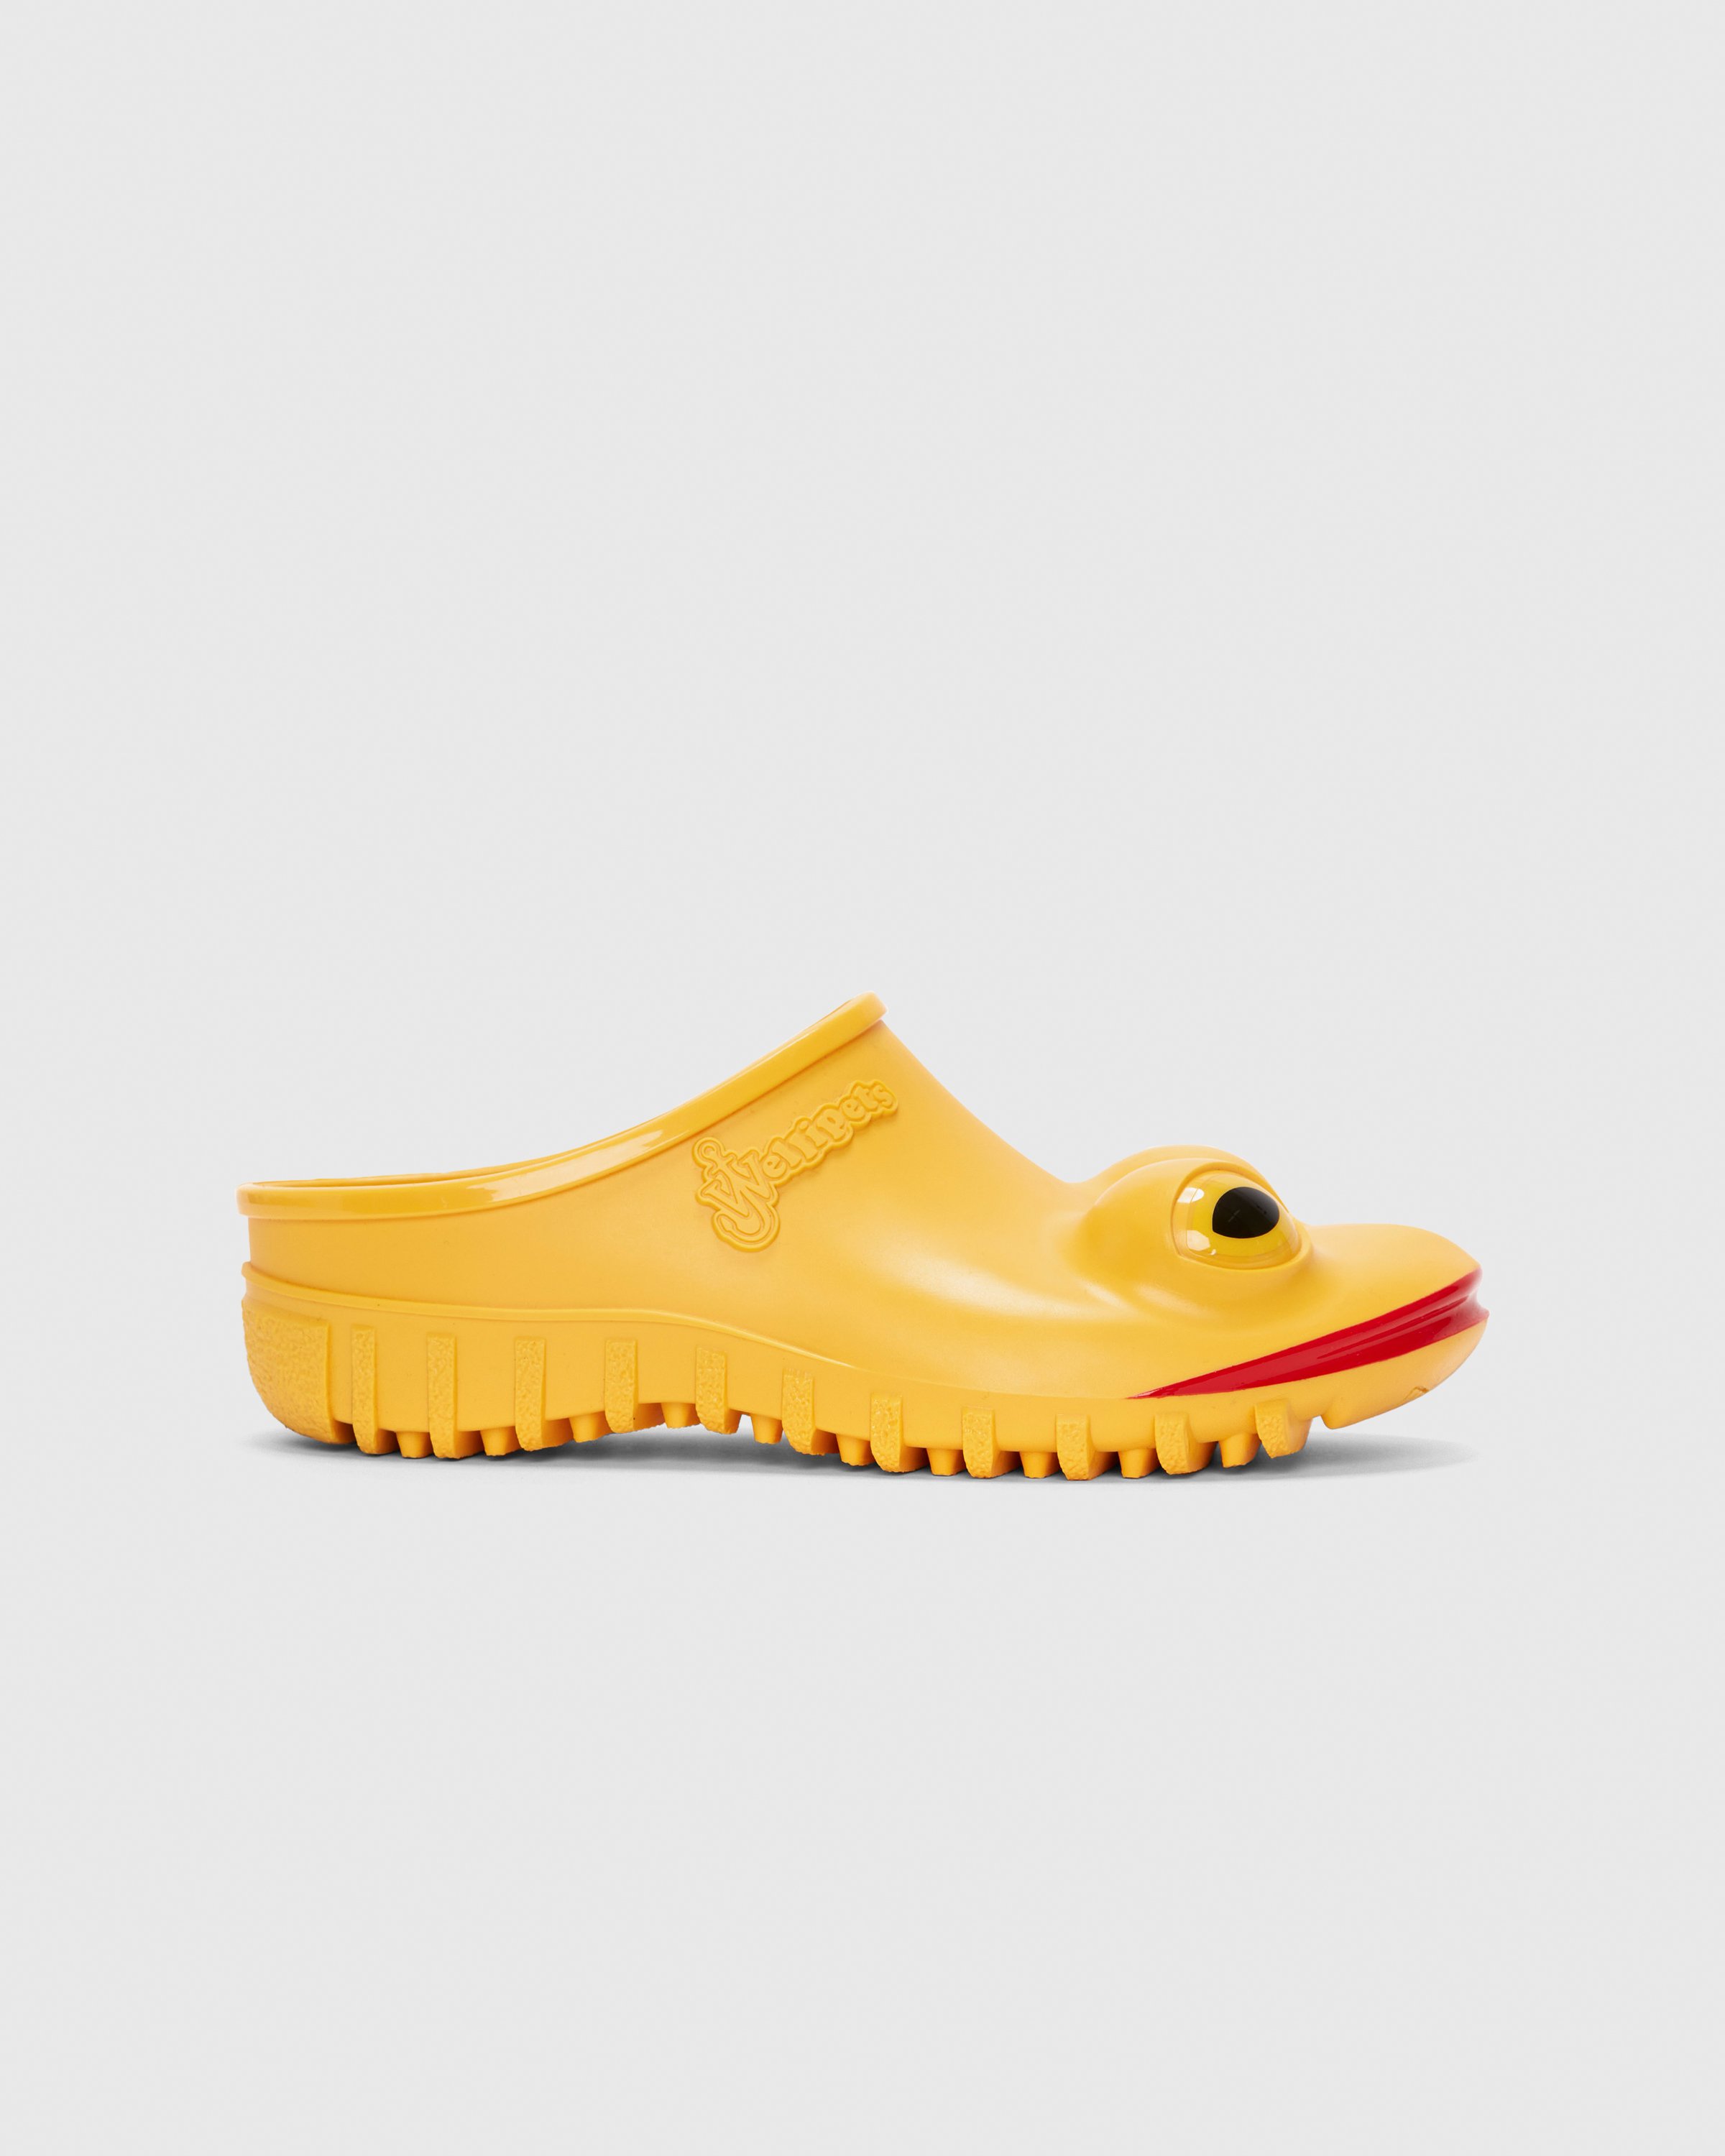 J.W. Anderson x Wellipets - Frog Loafer Yellow - Footwear - Yellow - Image 1